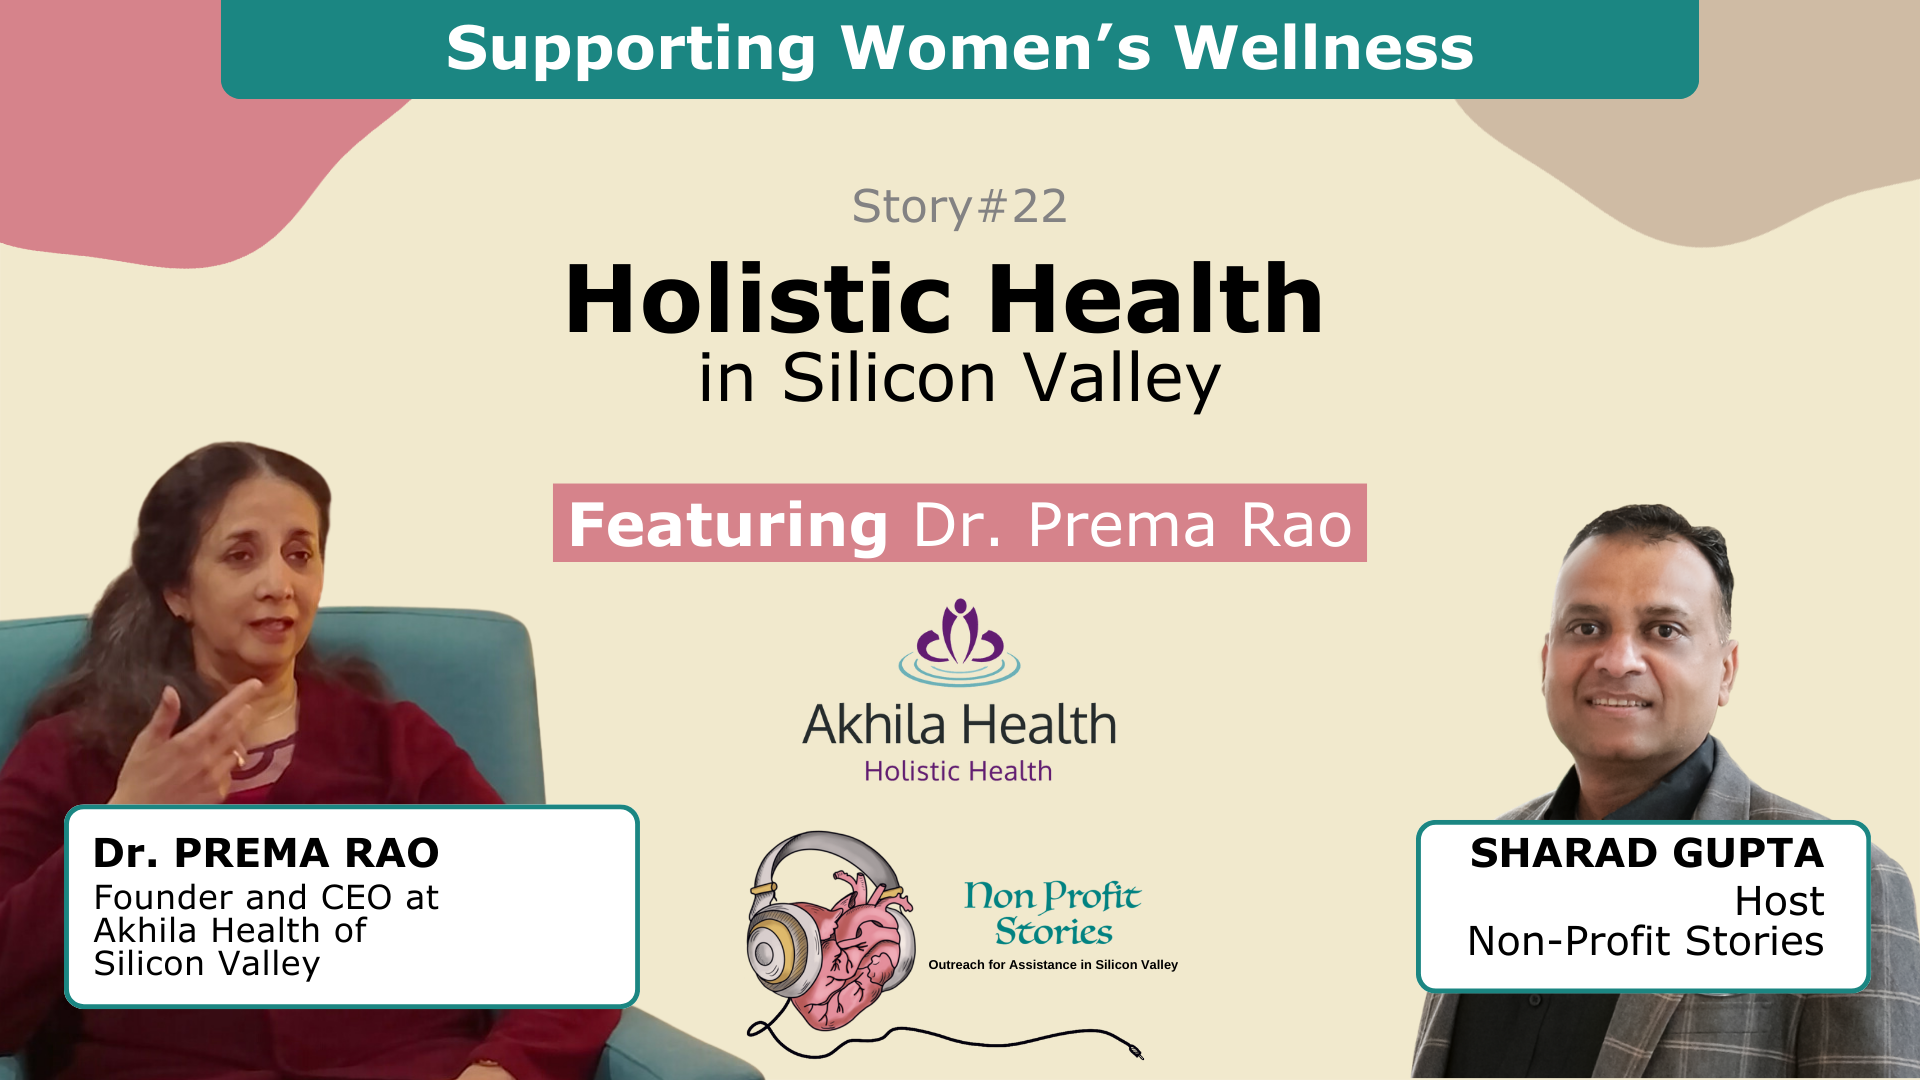 Holistic Health: Supporting Women’s Wellness in Silicon Valley